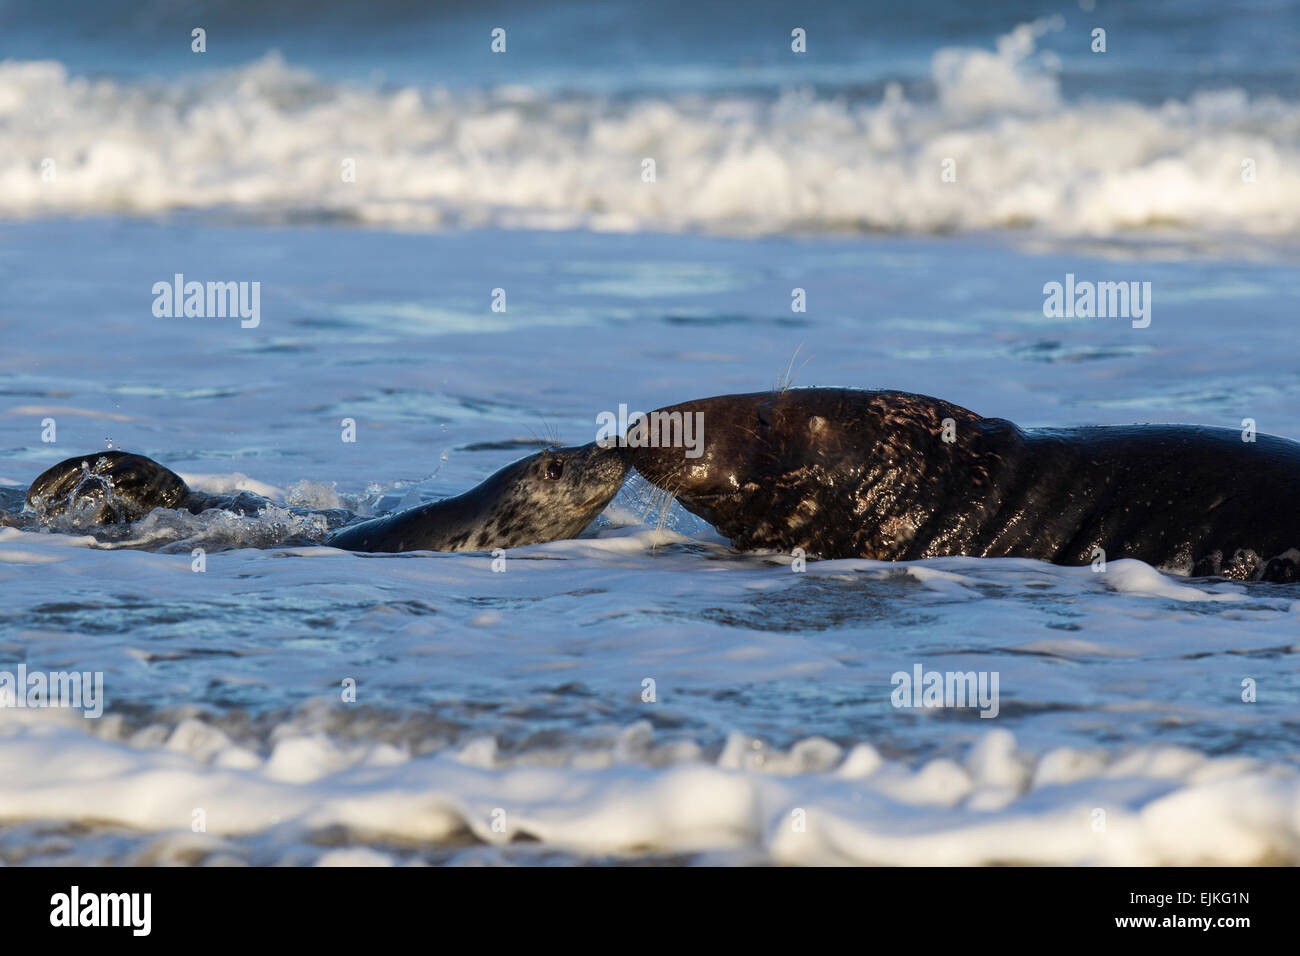 Grey Seal, Kegelrobbe, Halichoerus grypus, Helgoland, pair kissing in the waves Stock Photo